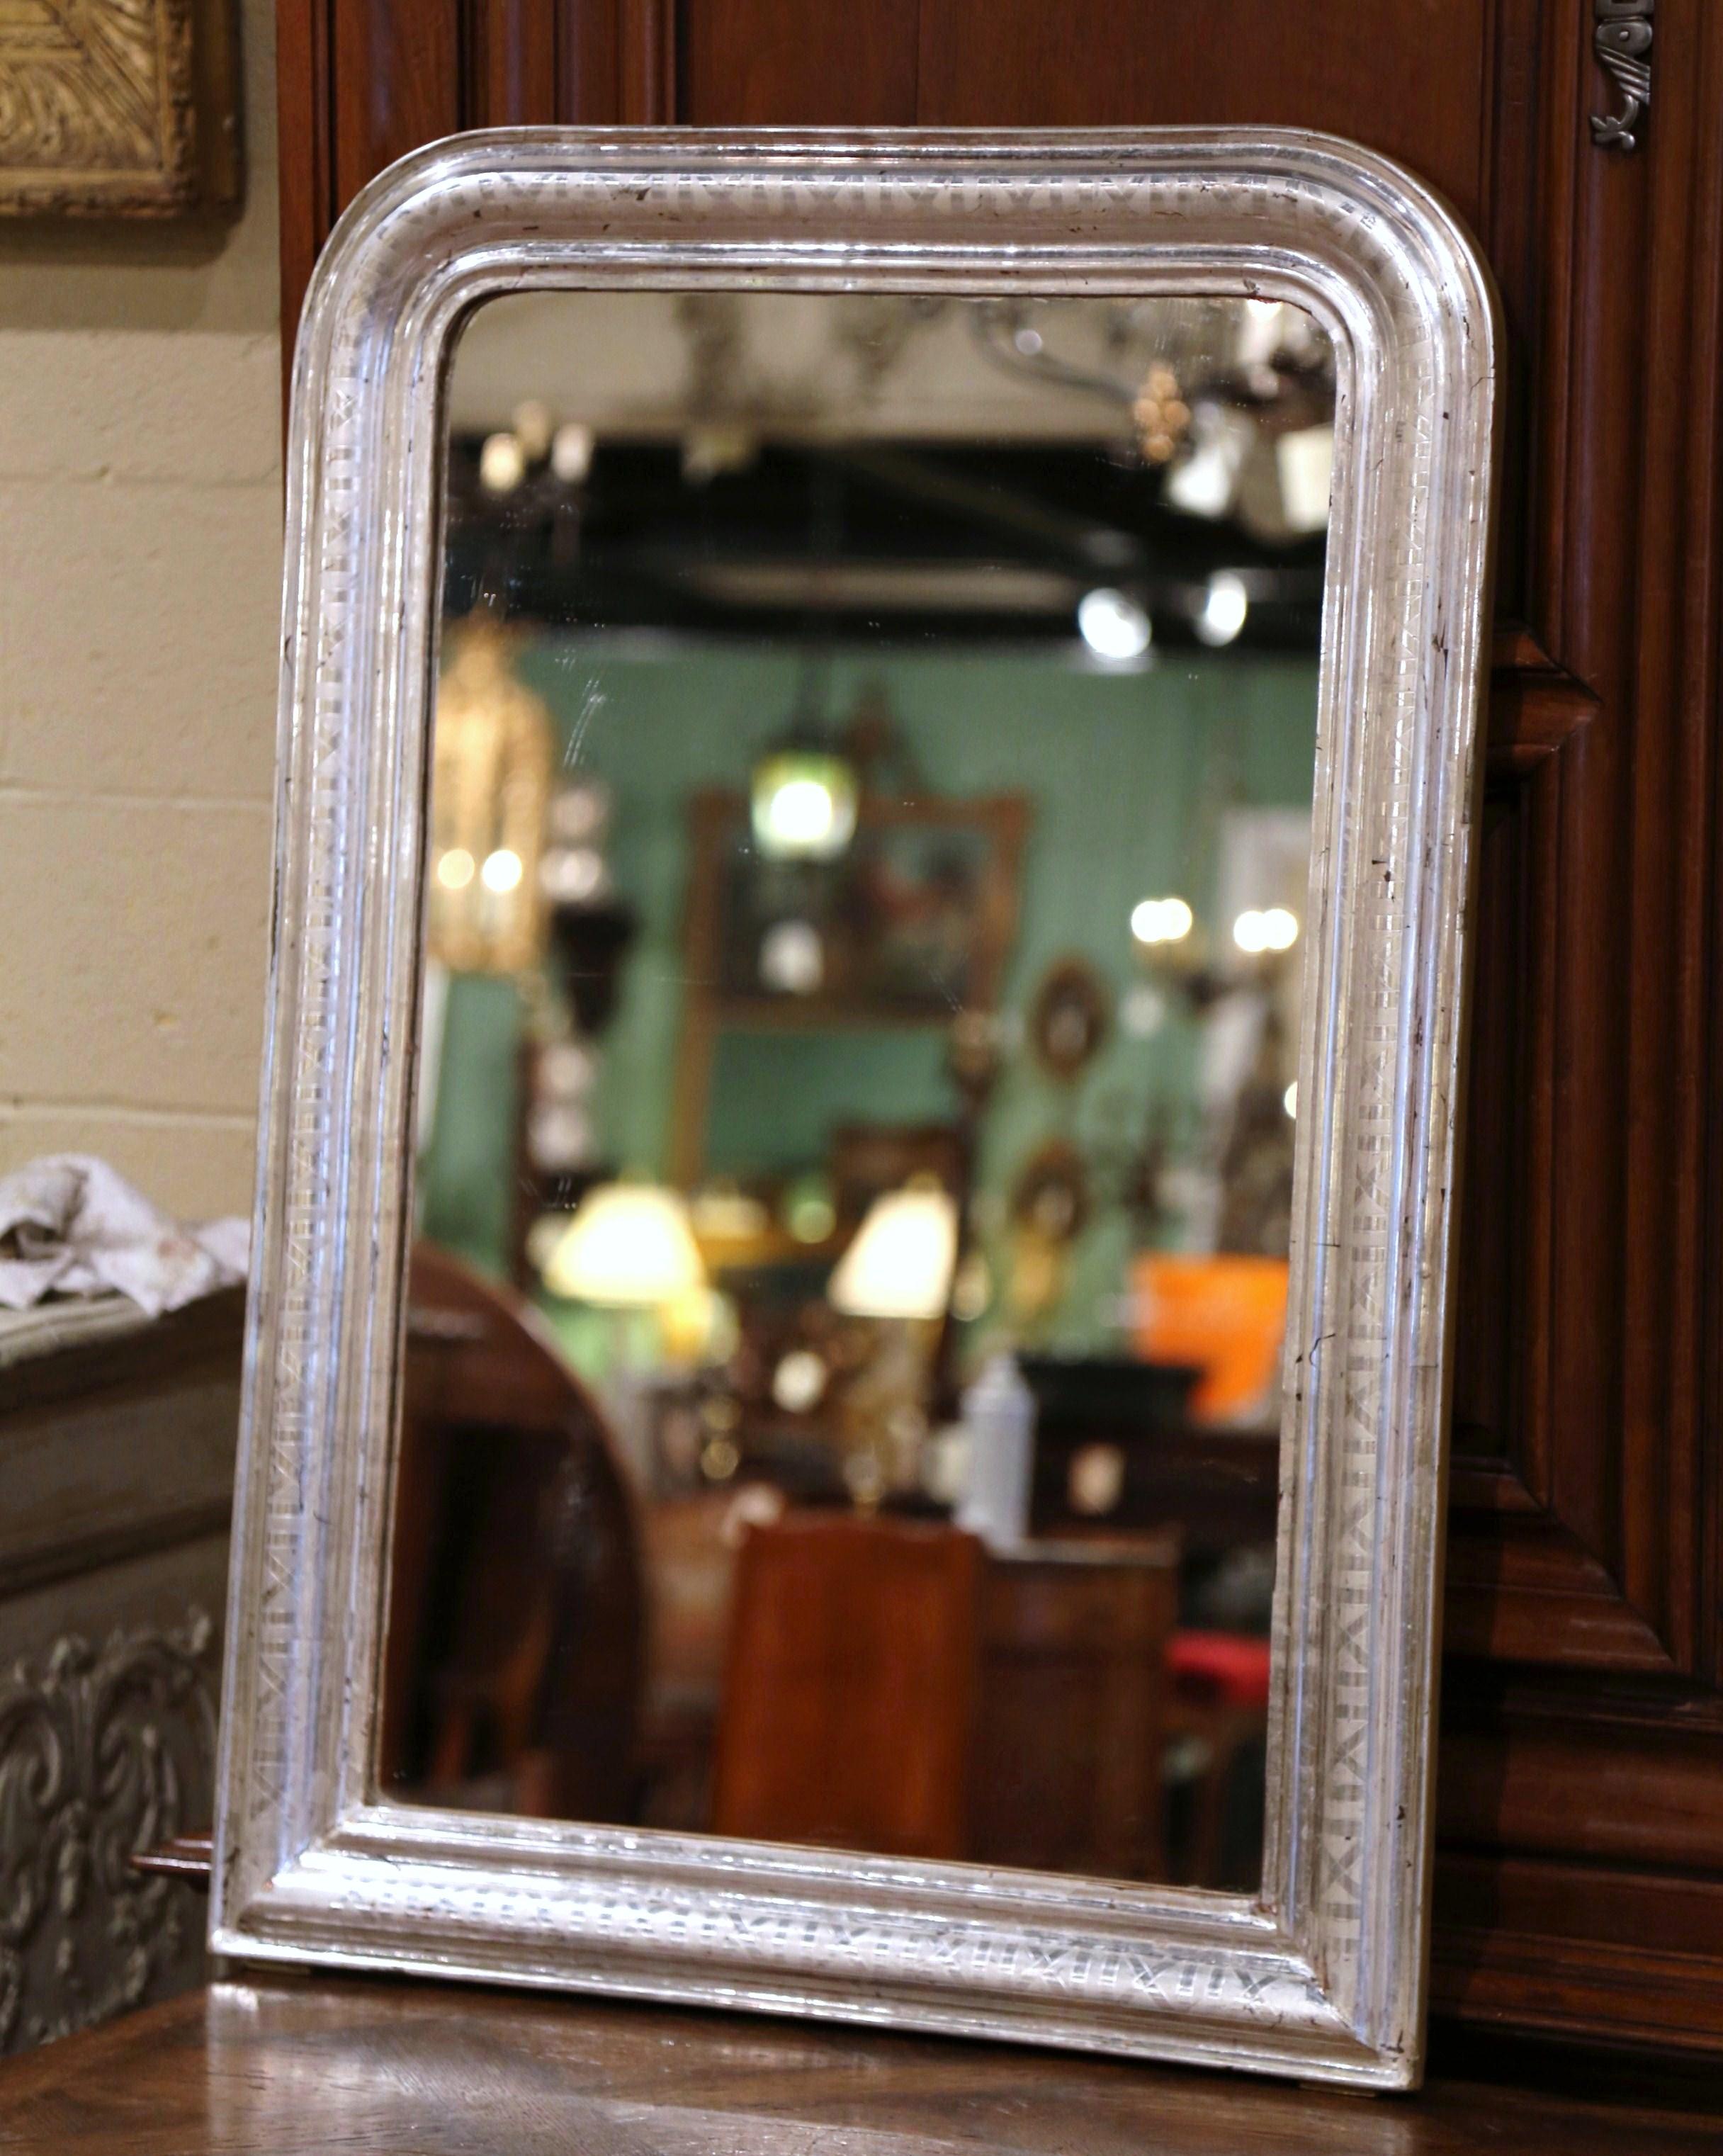 Crafted in the burgundy region of France, circa 1870, the rectangular wall mirror has traditional, timeless lines with rounded corners. The frame is decorated with a luxurious silver leaf finish, further embellished with an engraved geometric decor